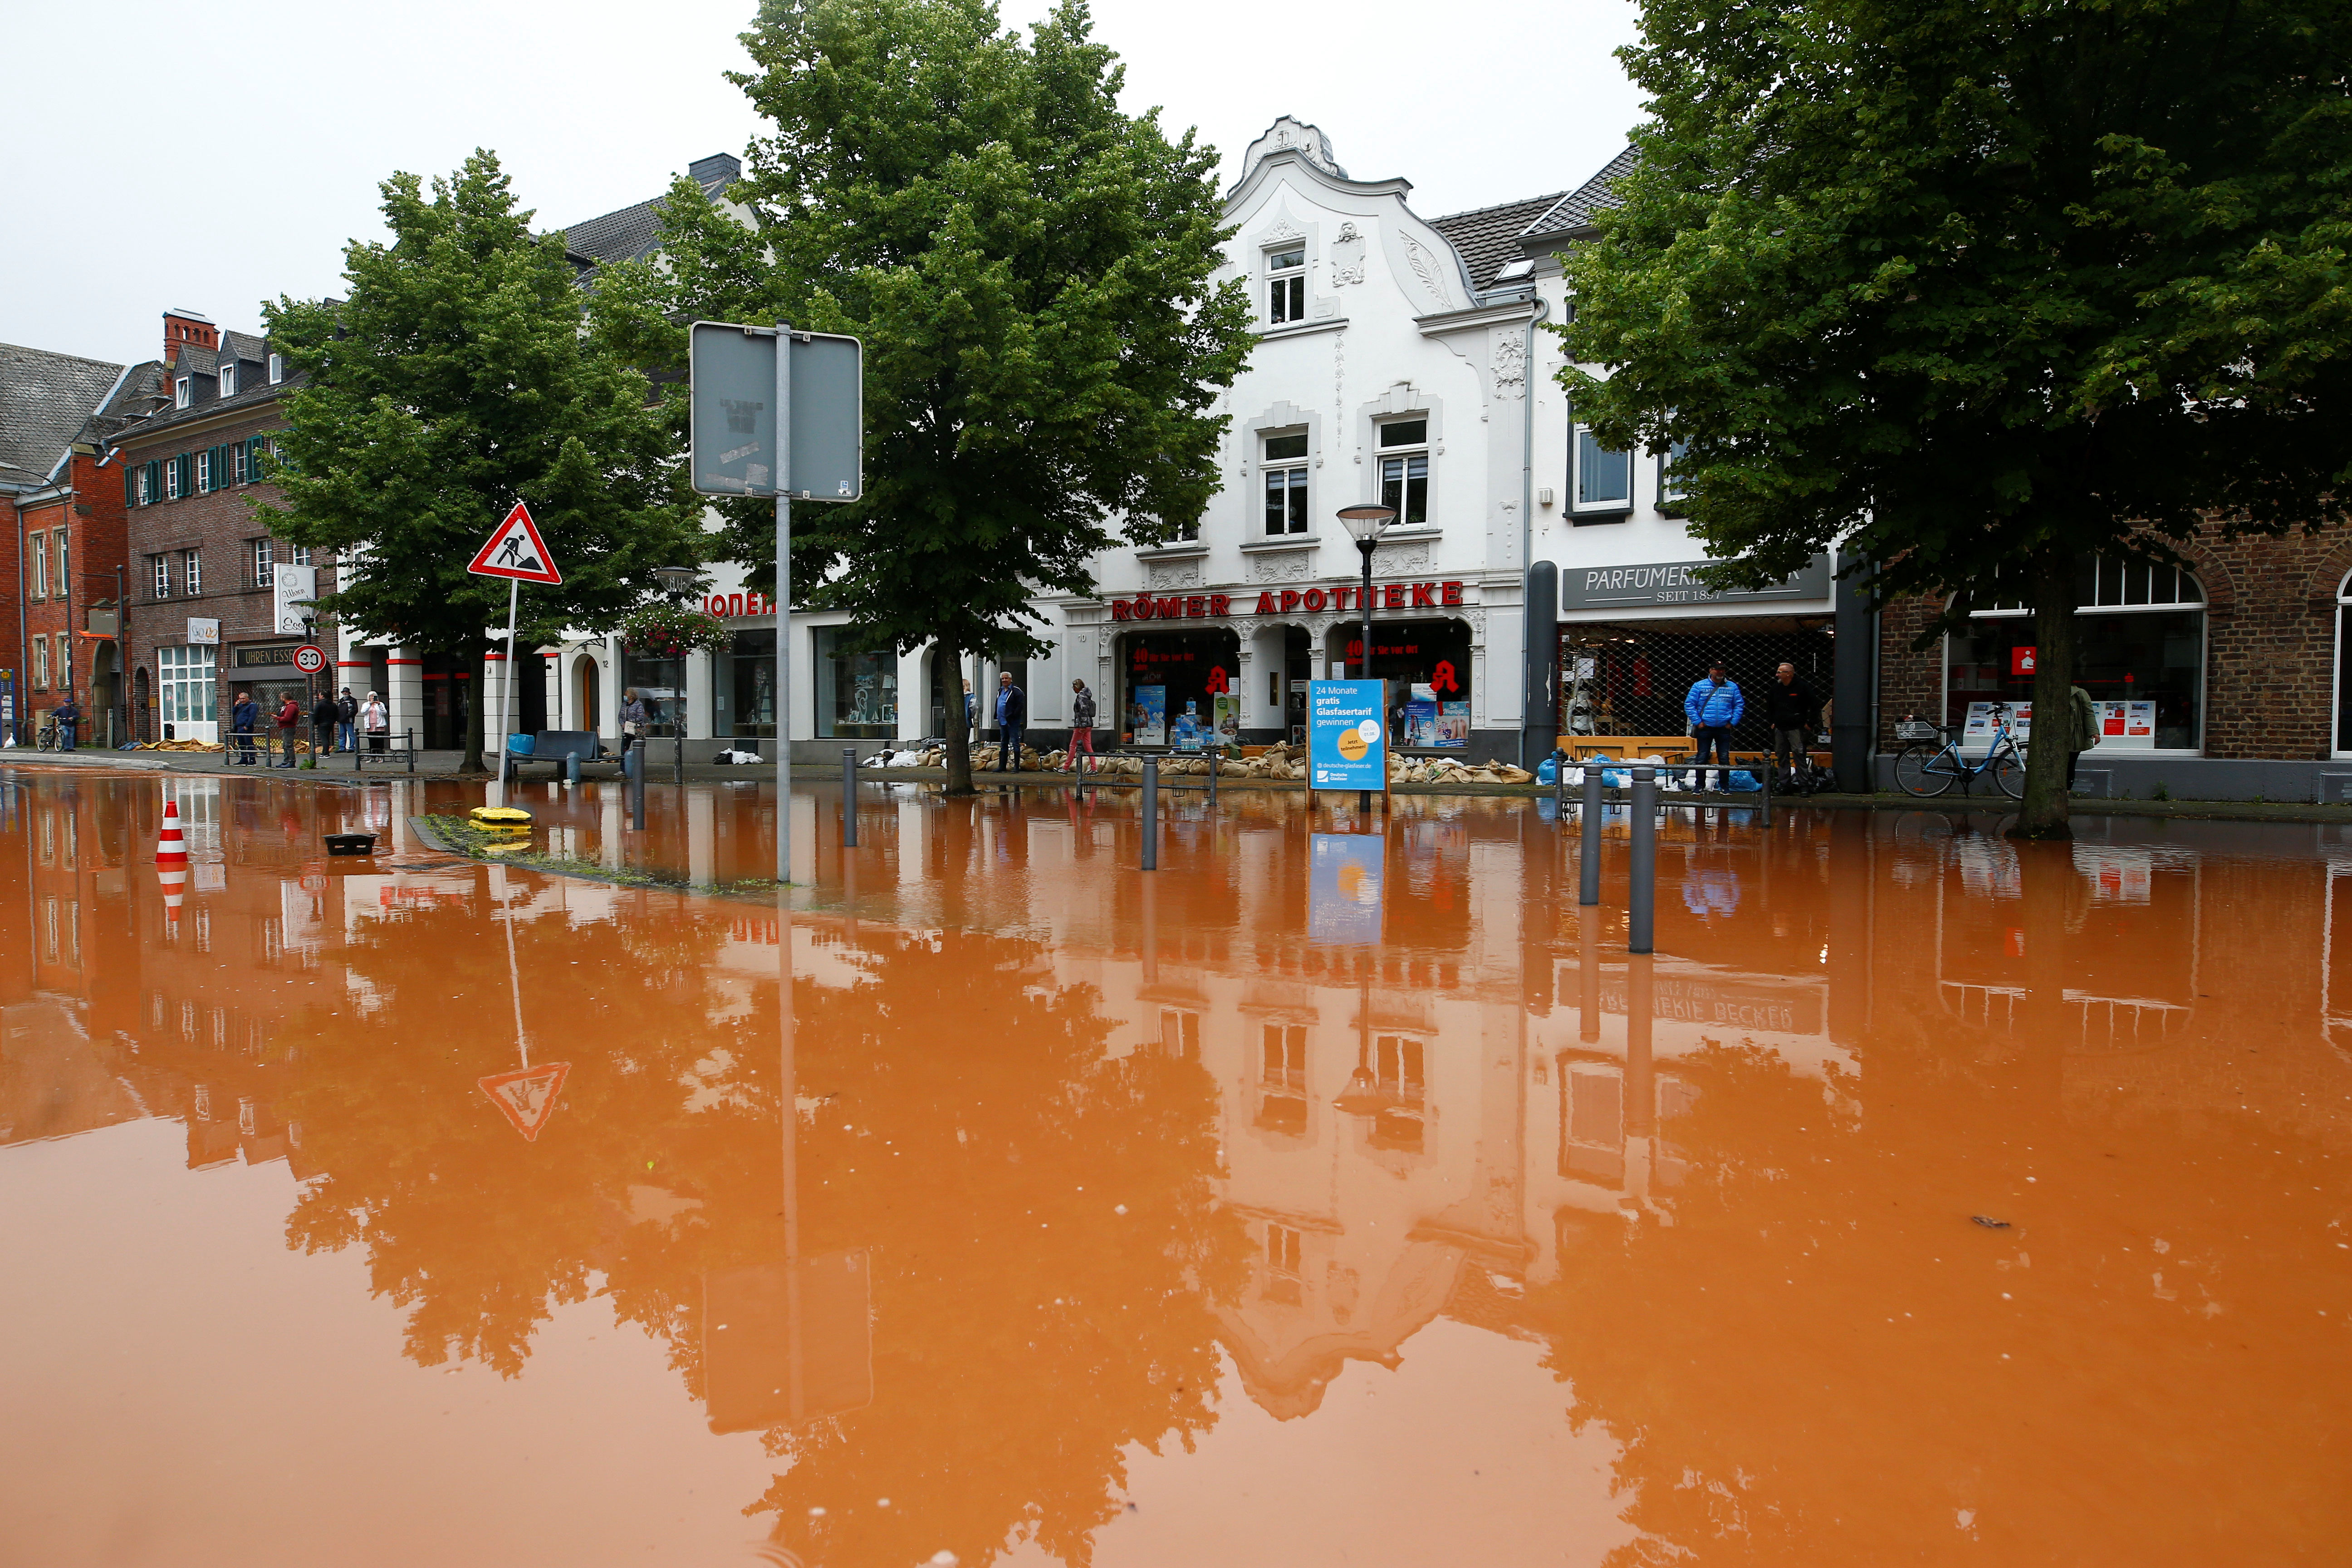 Aftermath of heavy rainfalls in Germany